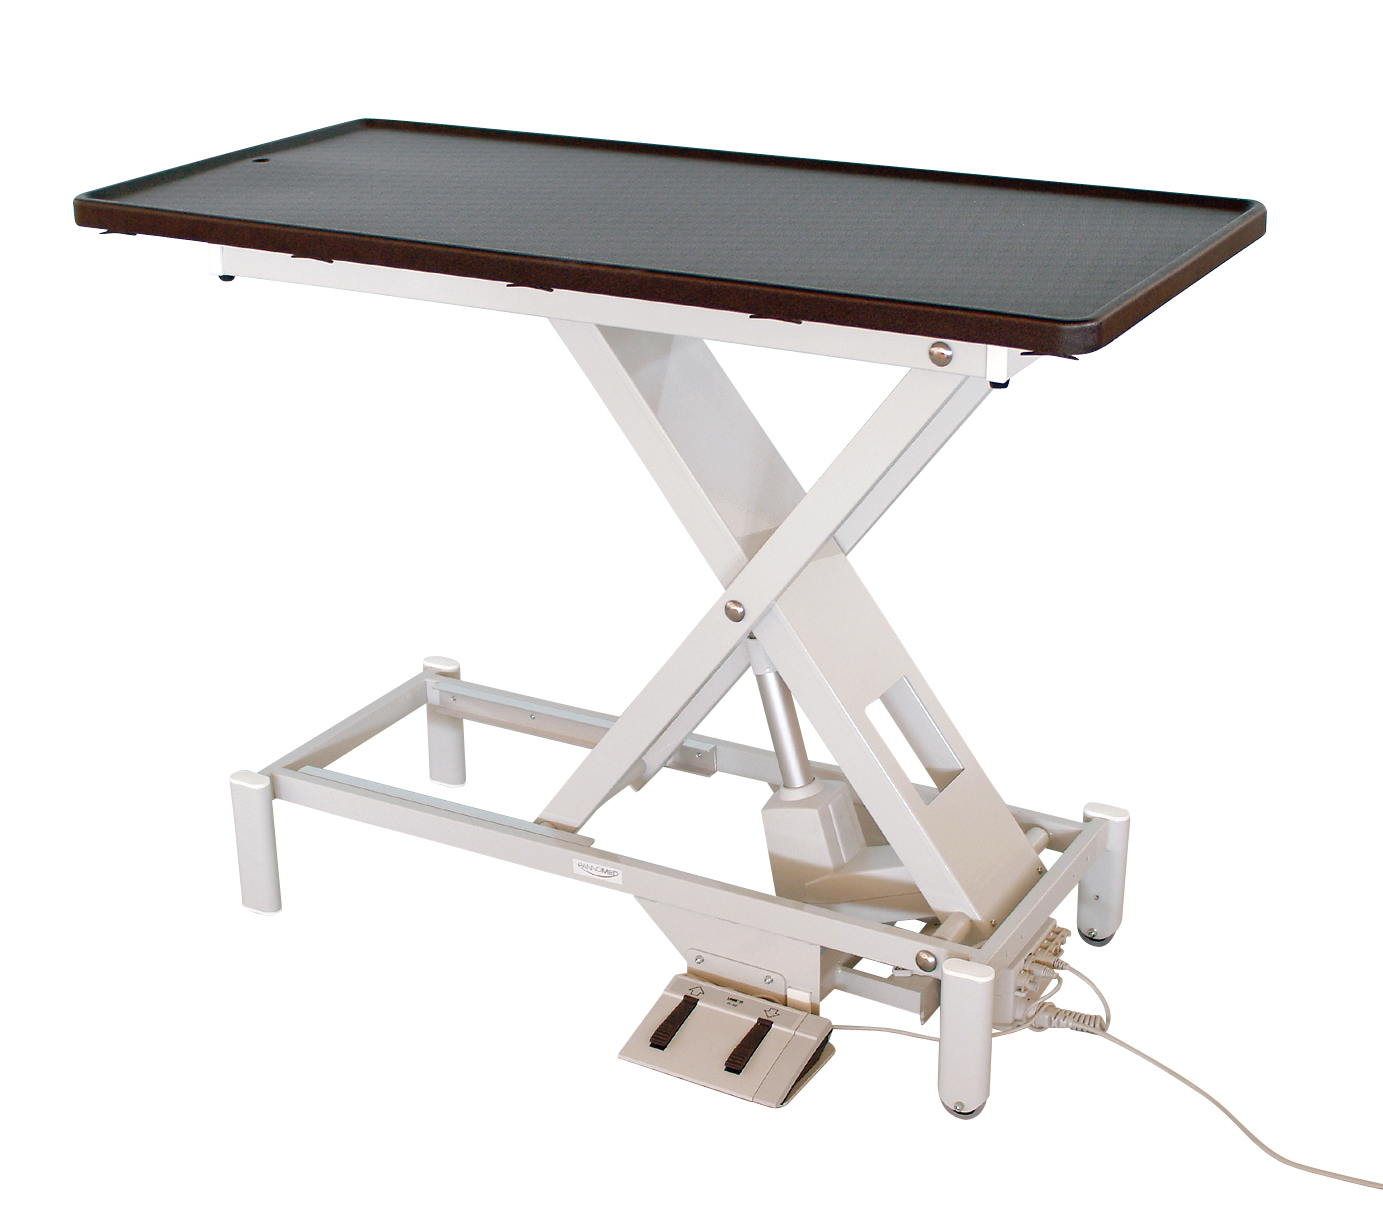 Vet Lift Table, hydraulic synthetic table top and tilting mechanism, 2 small castors